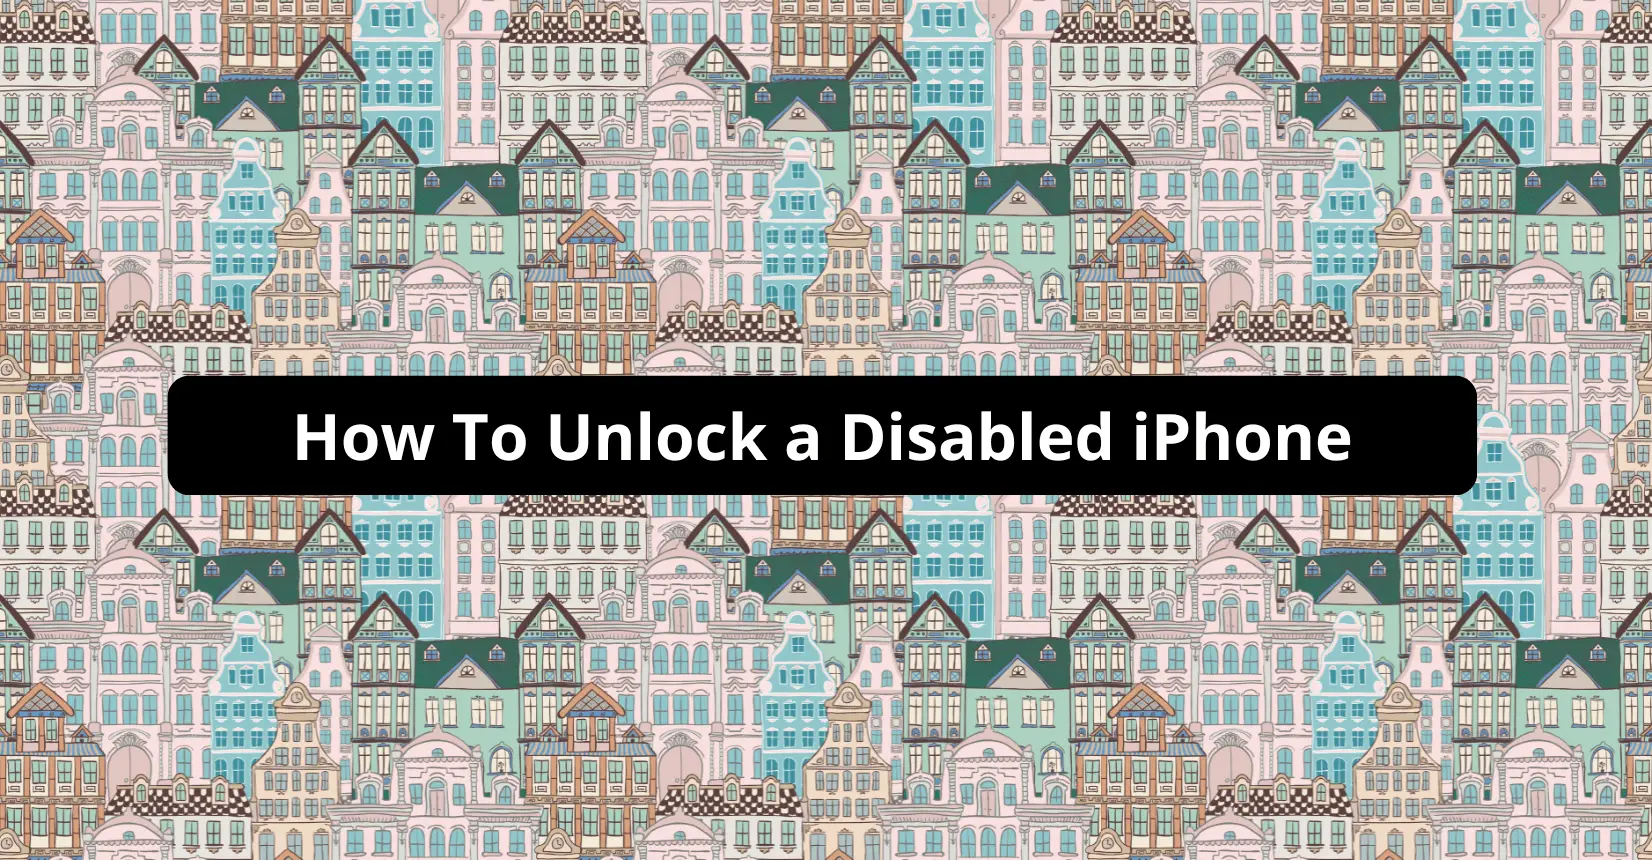 How To Unlock a Disabled iPhone